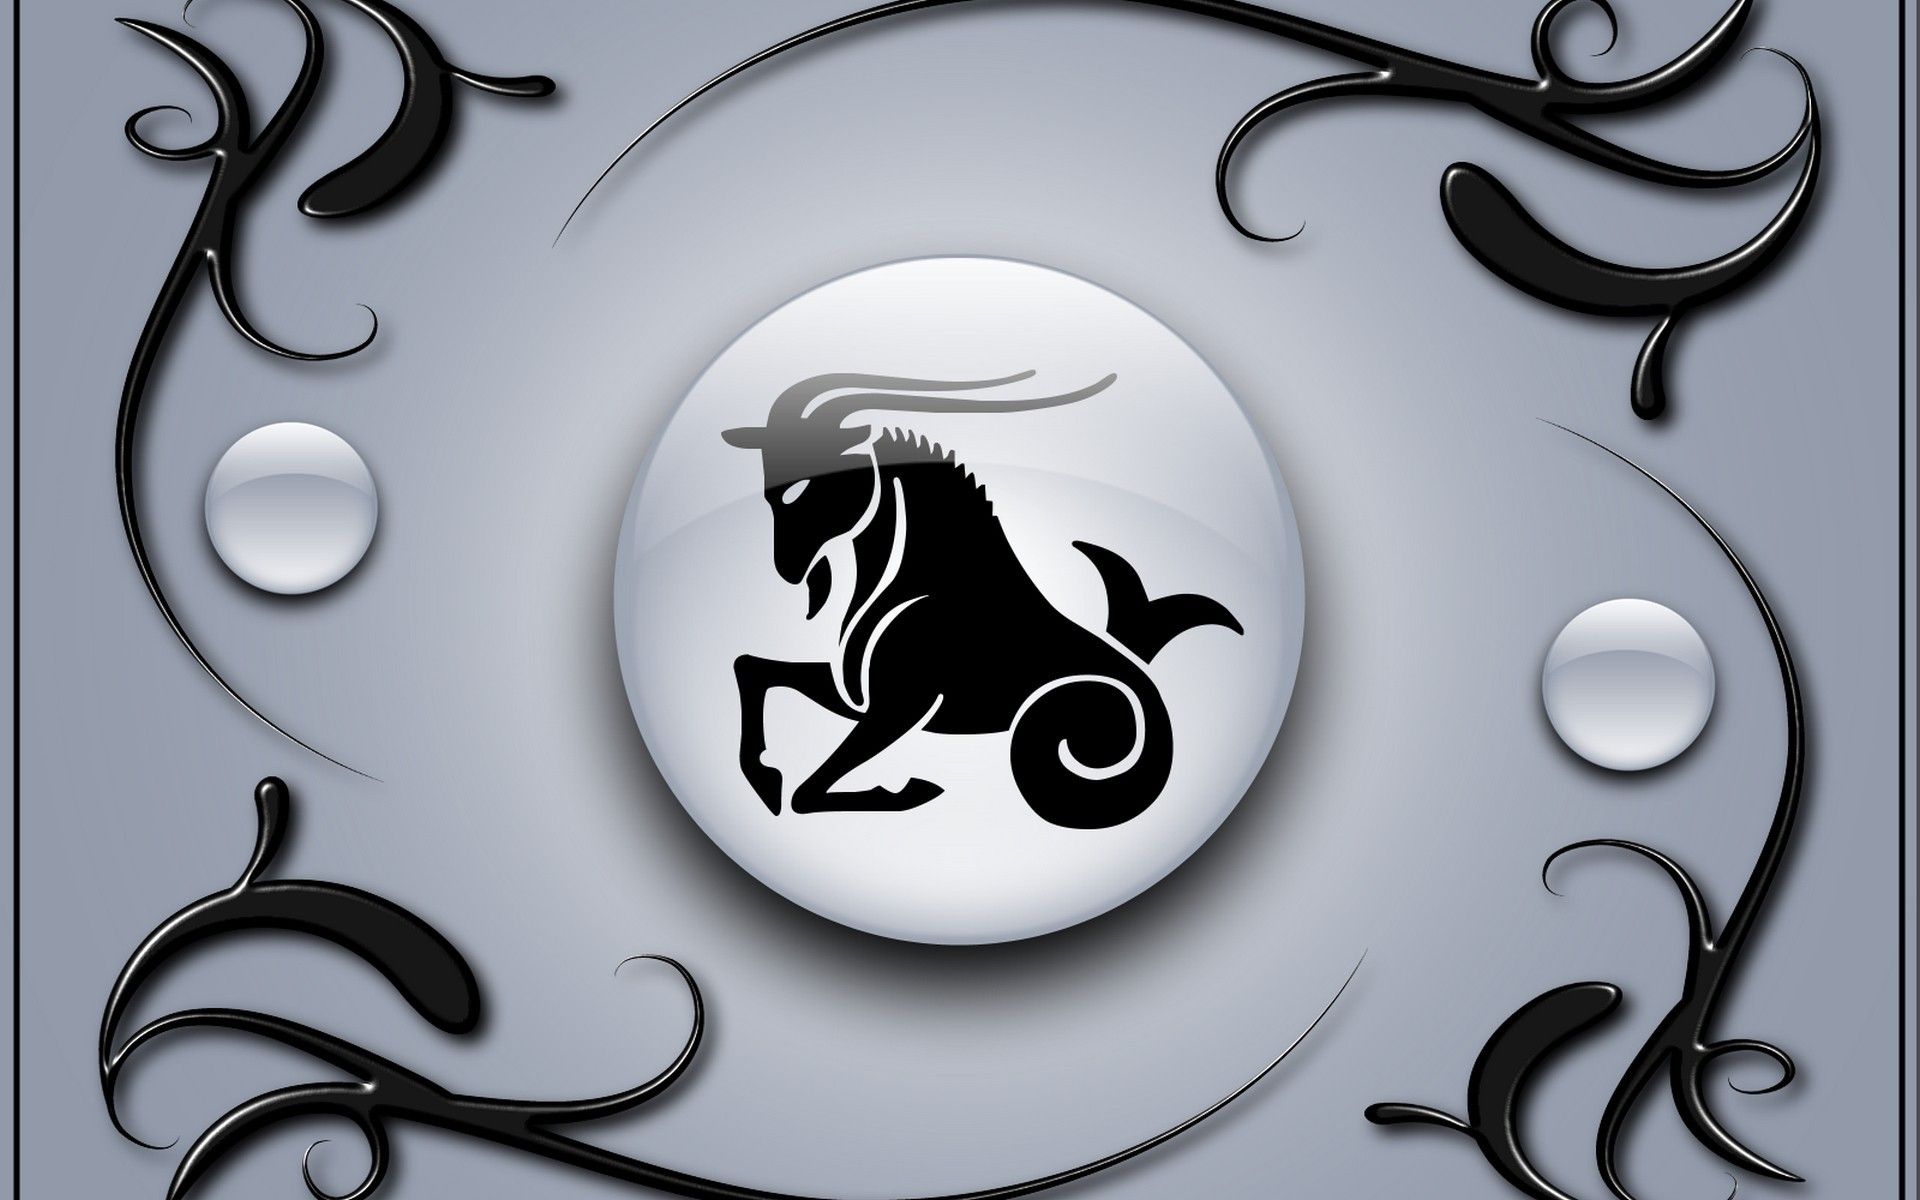 The Capricorn Sign wallpaper is available in different sizes and resolutions to suit all of your needs. - Capricorn